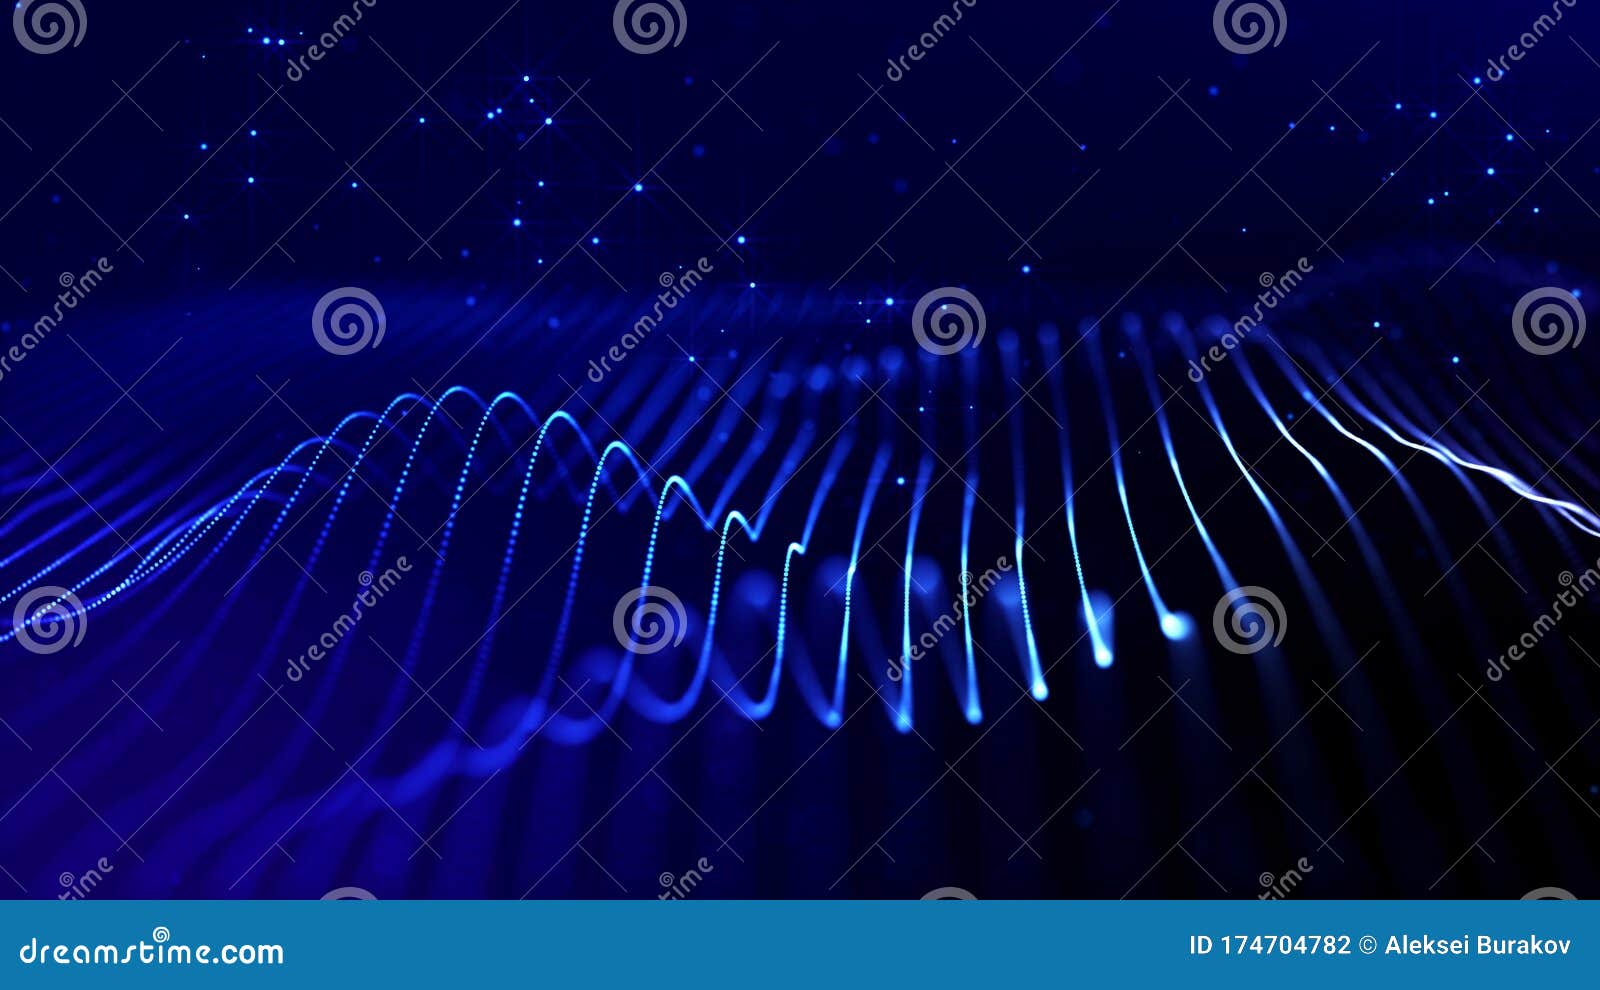 Abstract Sci-fi Background with Glow Particles Form Curved Lines